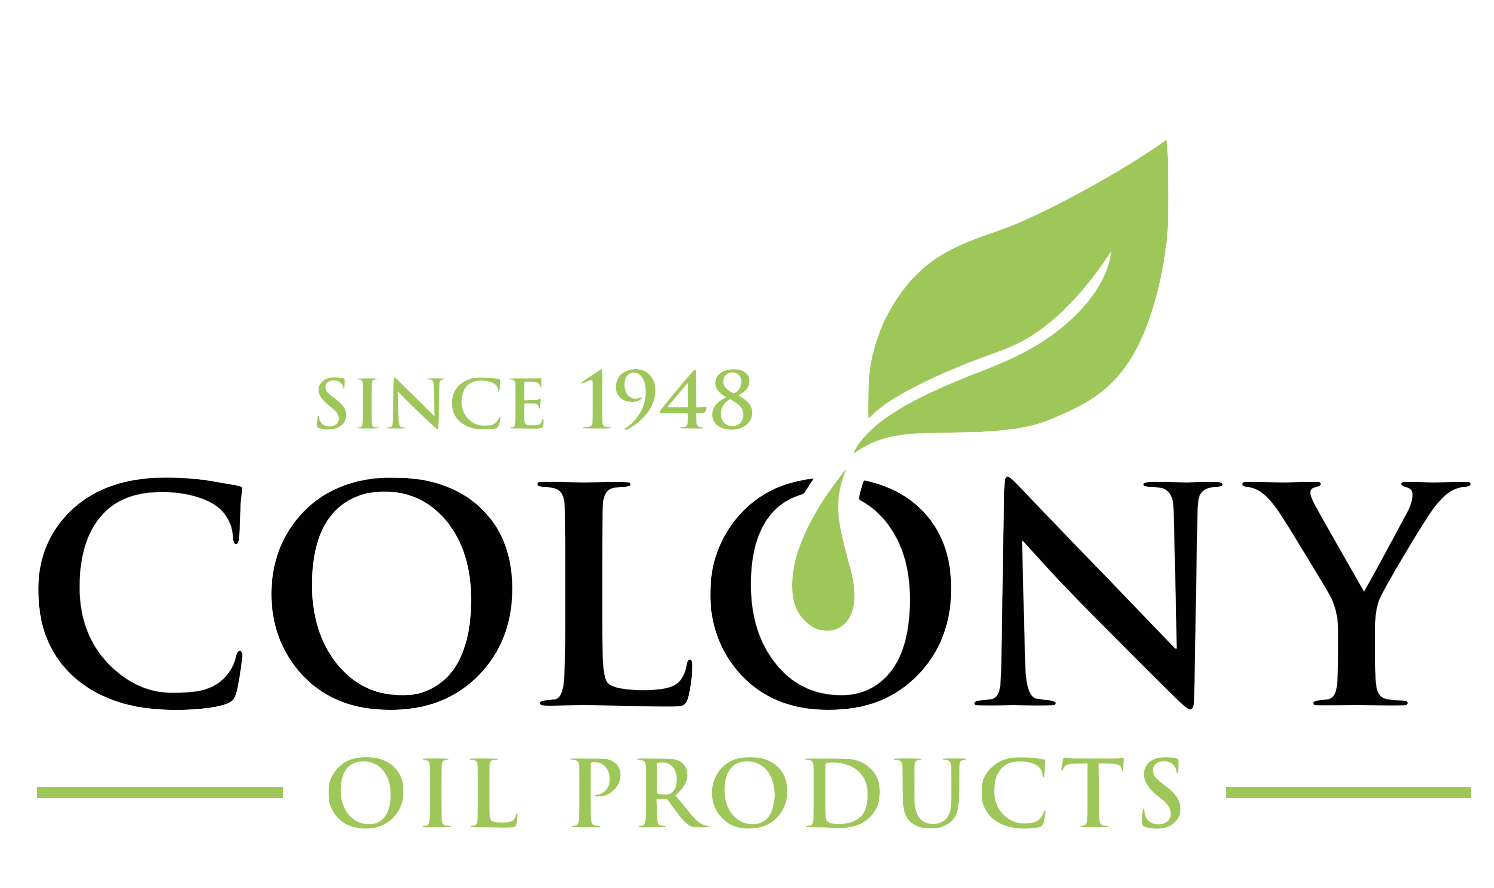 Colony Products